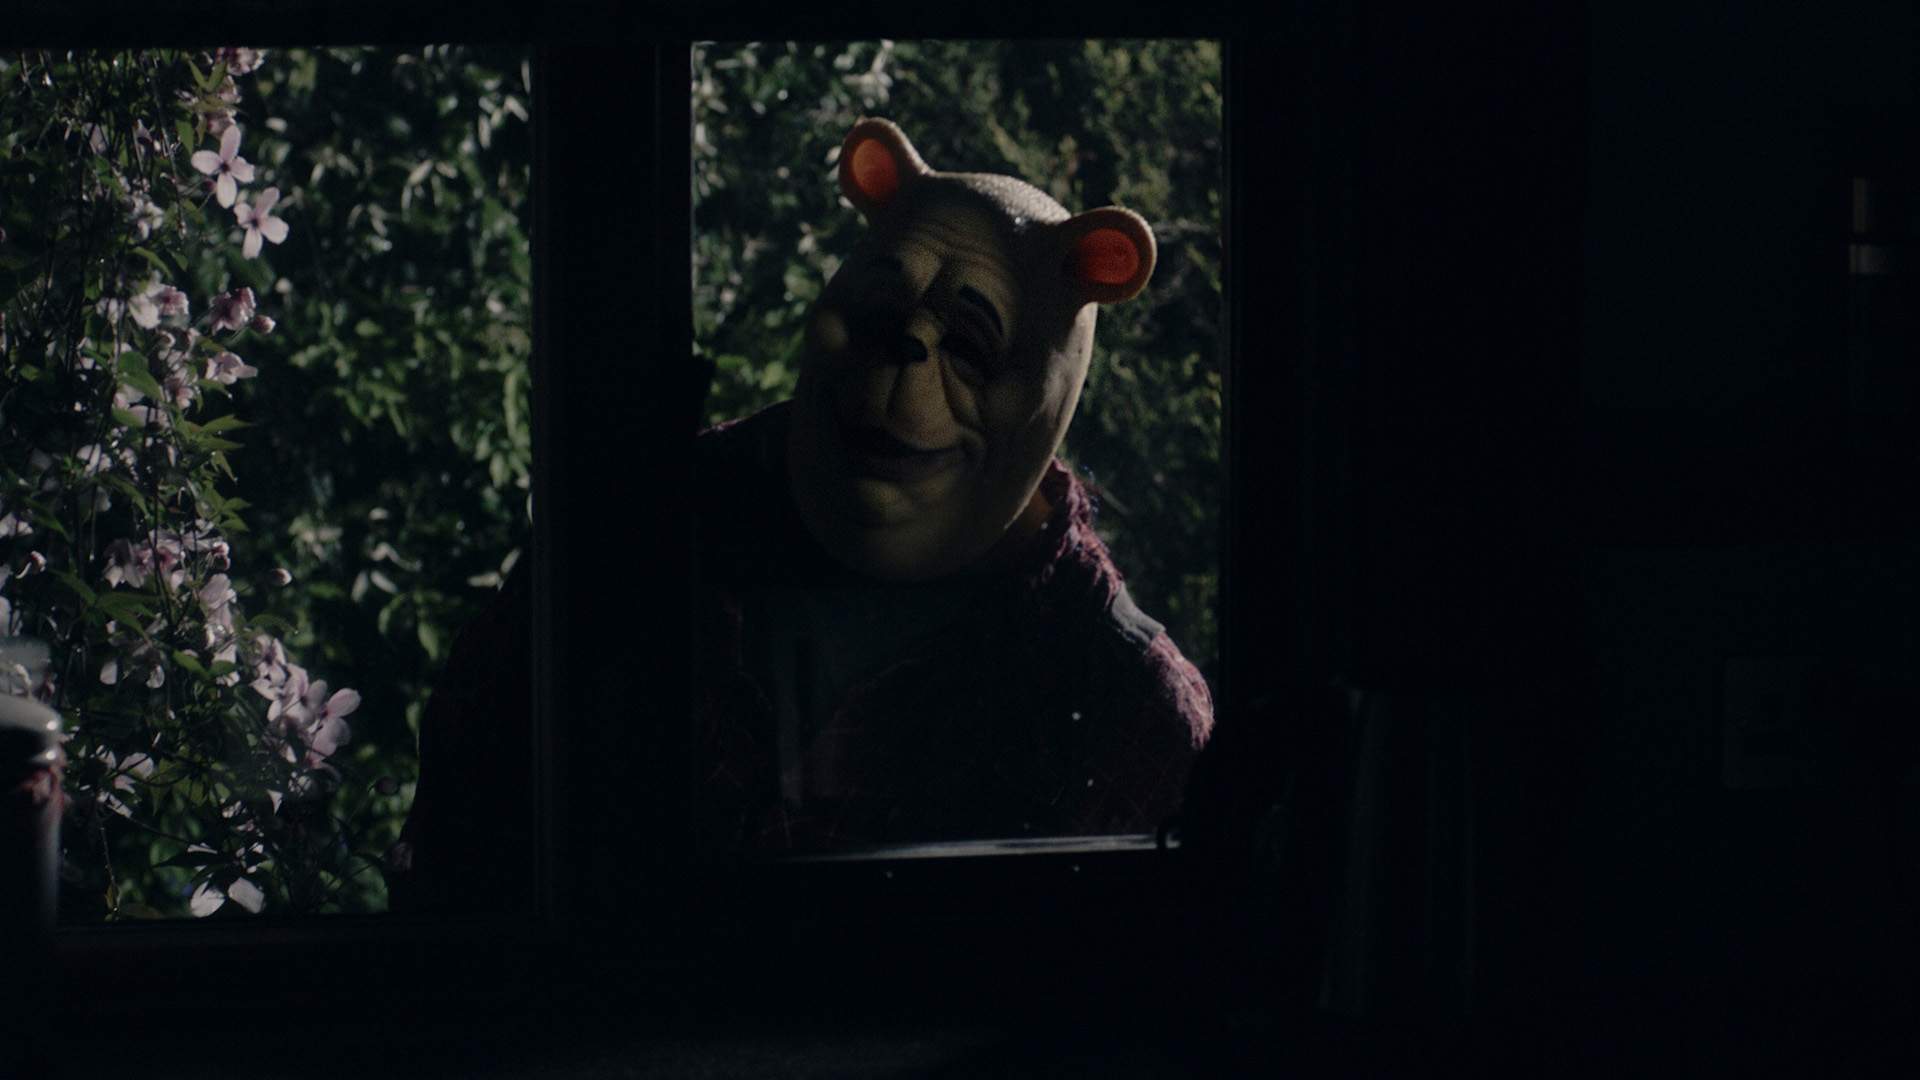 Creepy Slasher Flick 'Winnie-the-Pooh: Blood and Honey' Is Coming to Australian Cinemas in February